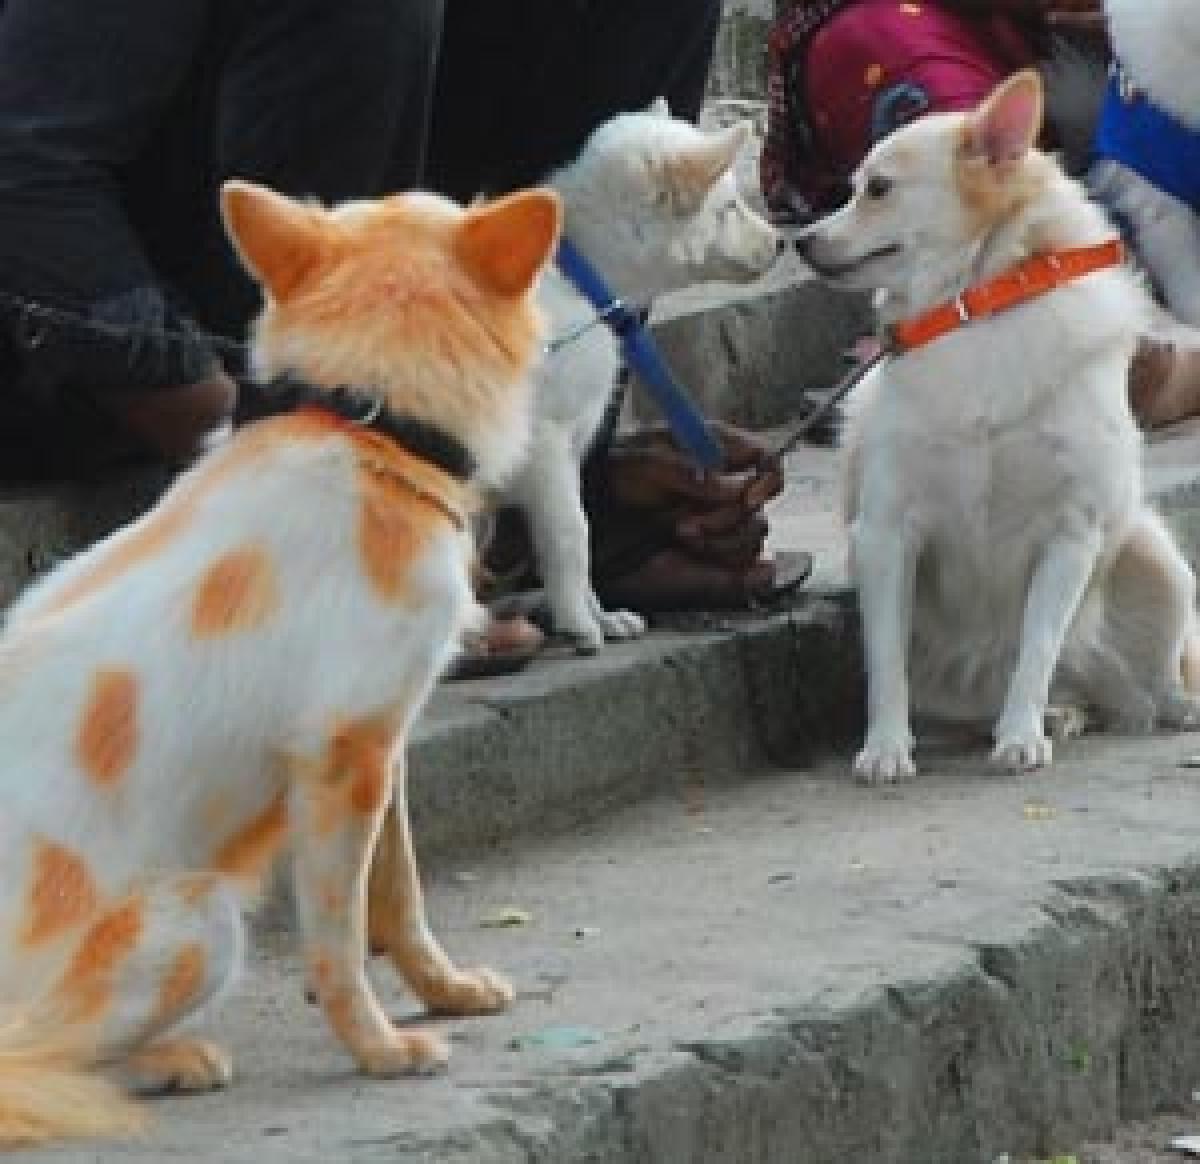 Over 1,500 pet dogs given anti-rabies vaccine